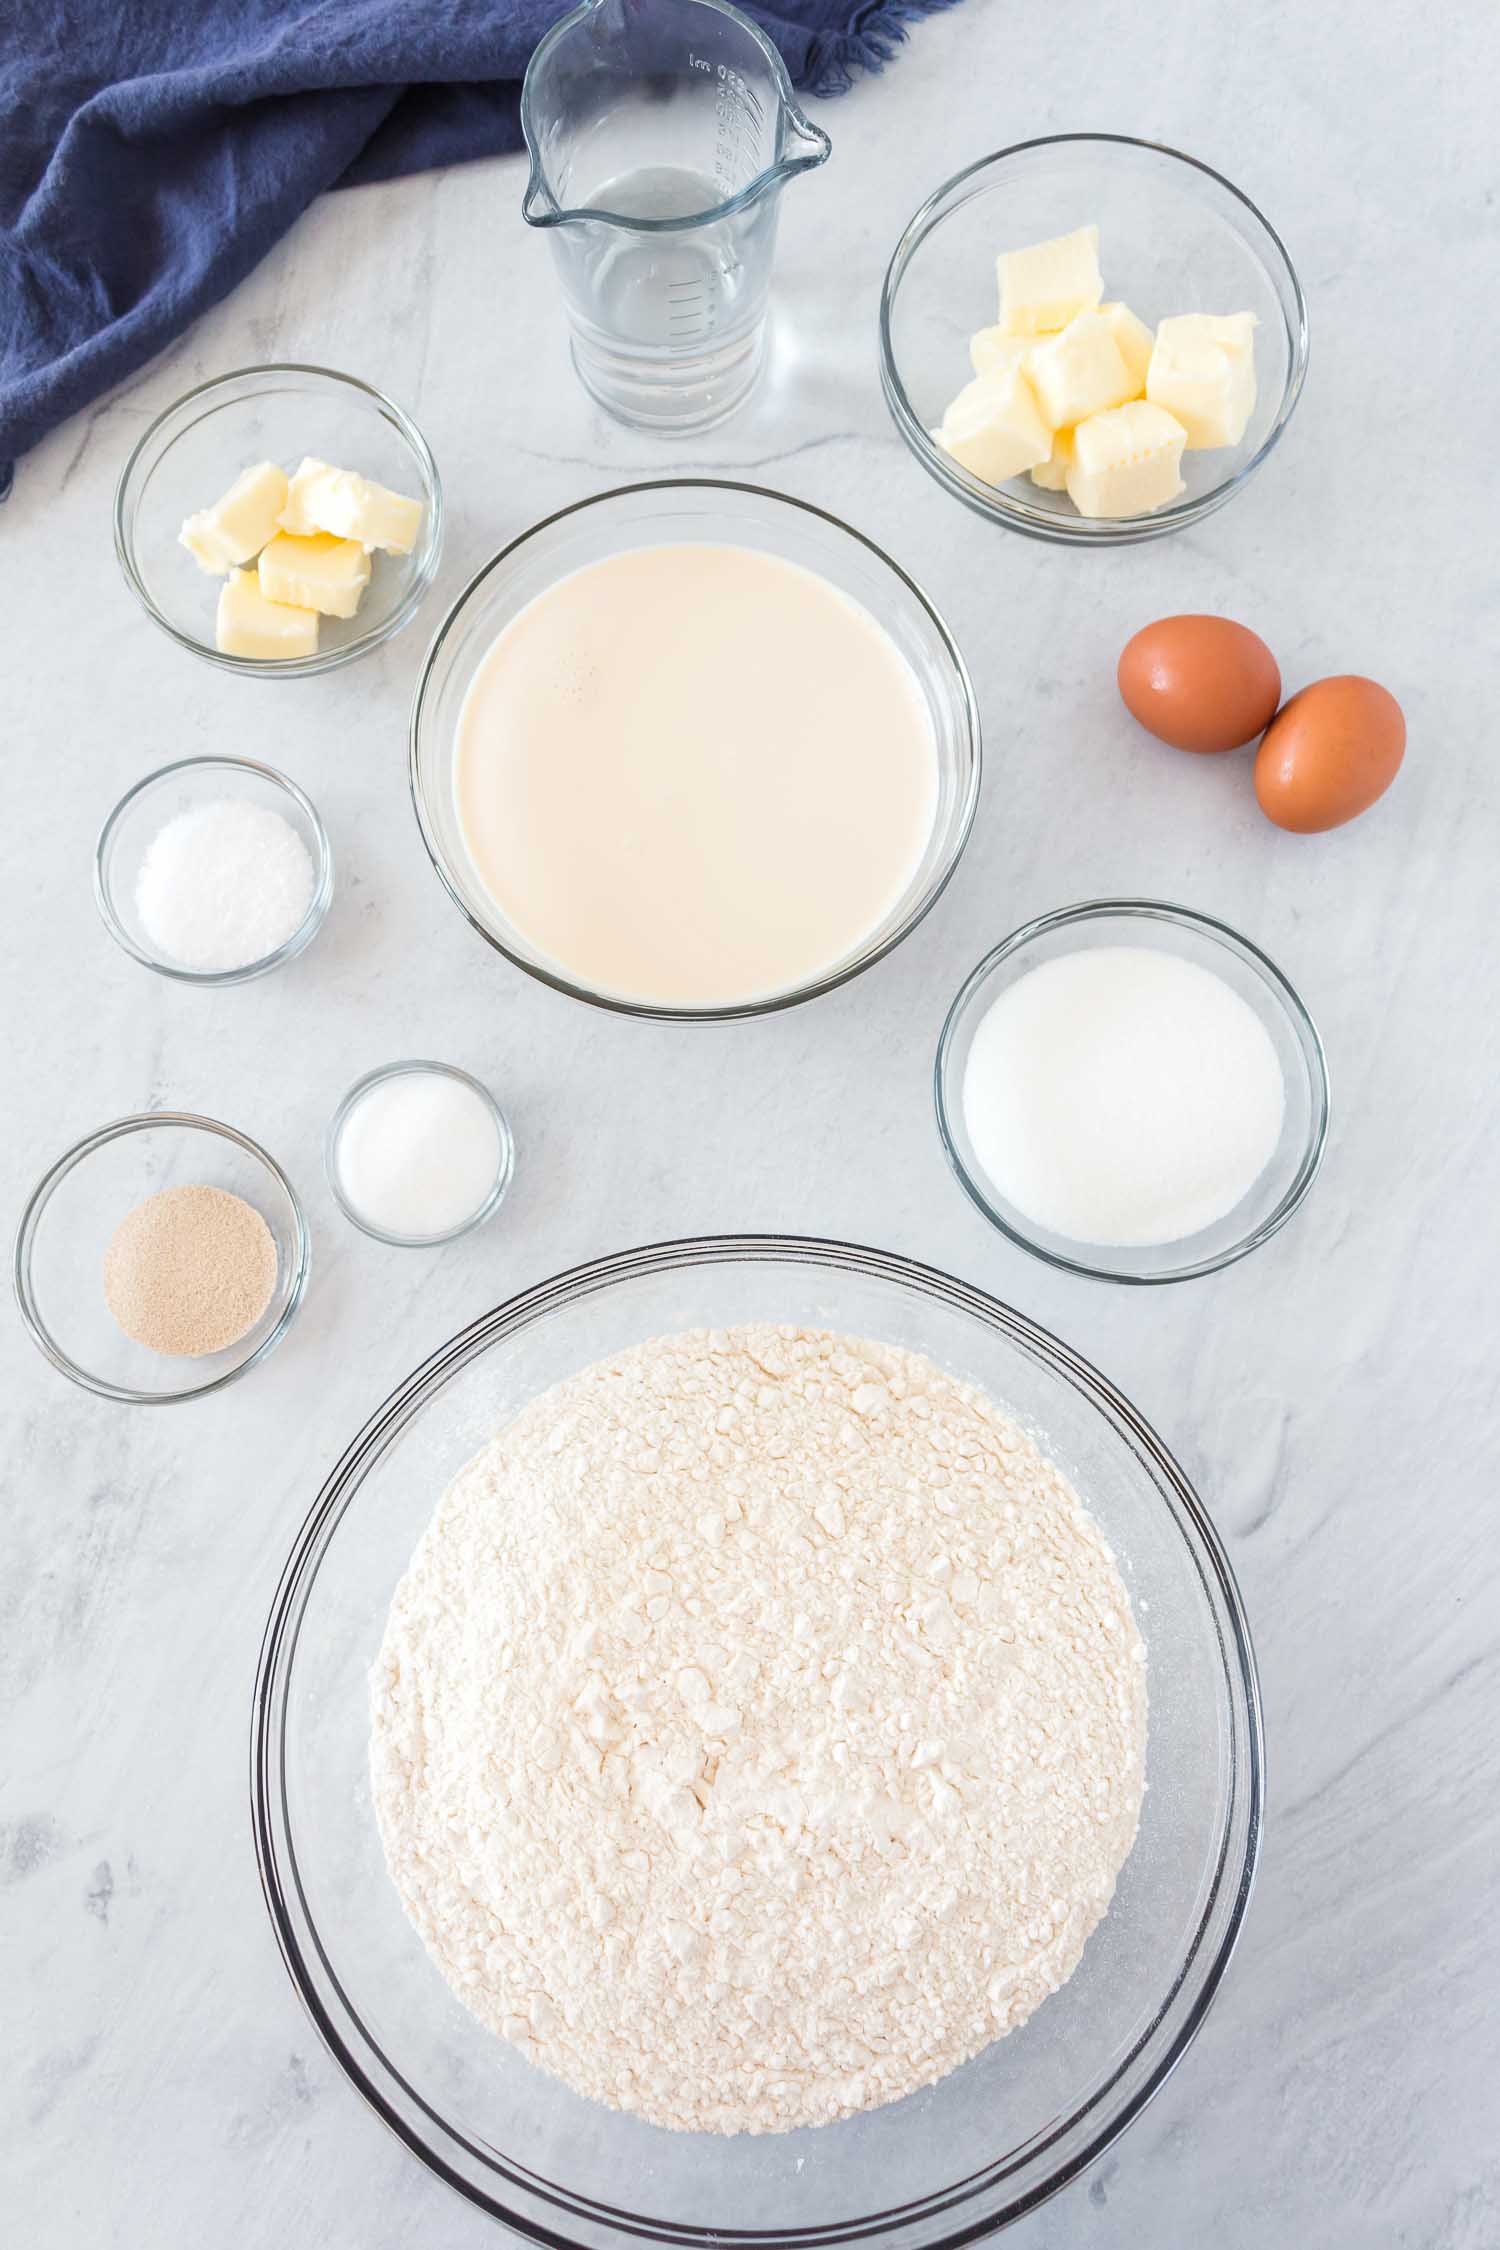 Glass bowls with ingredients: butter milk, flour, sugar, salt, yeast, water and 2 whole eggs on the side.